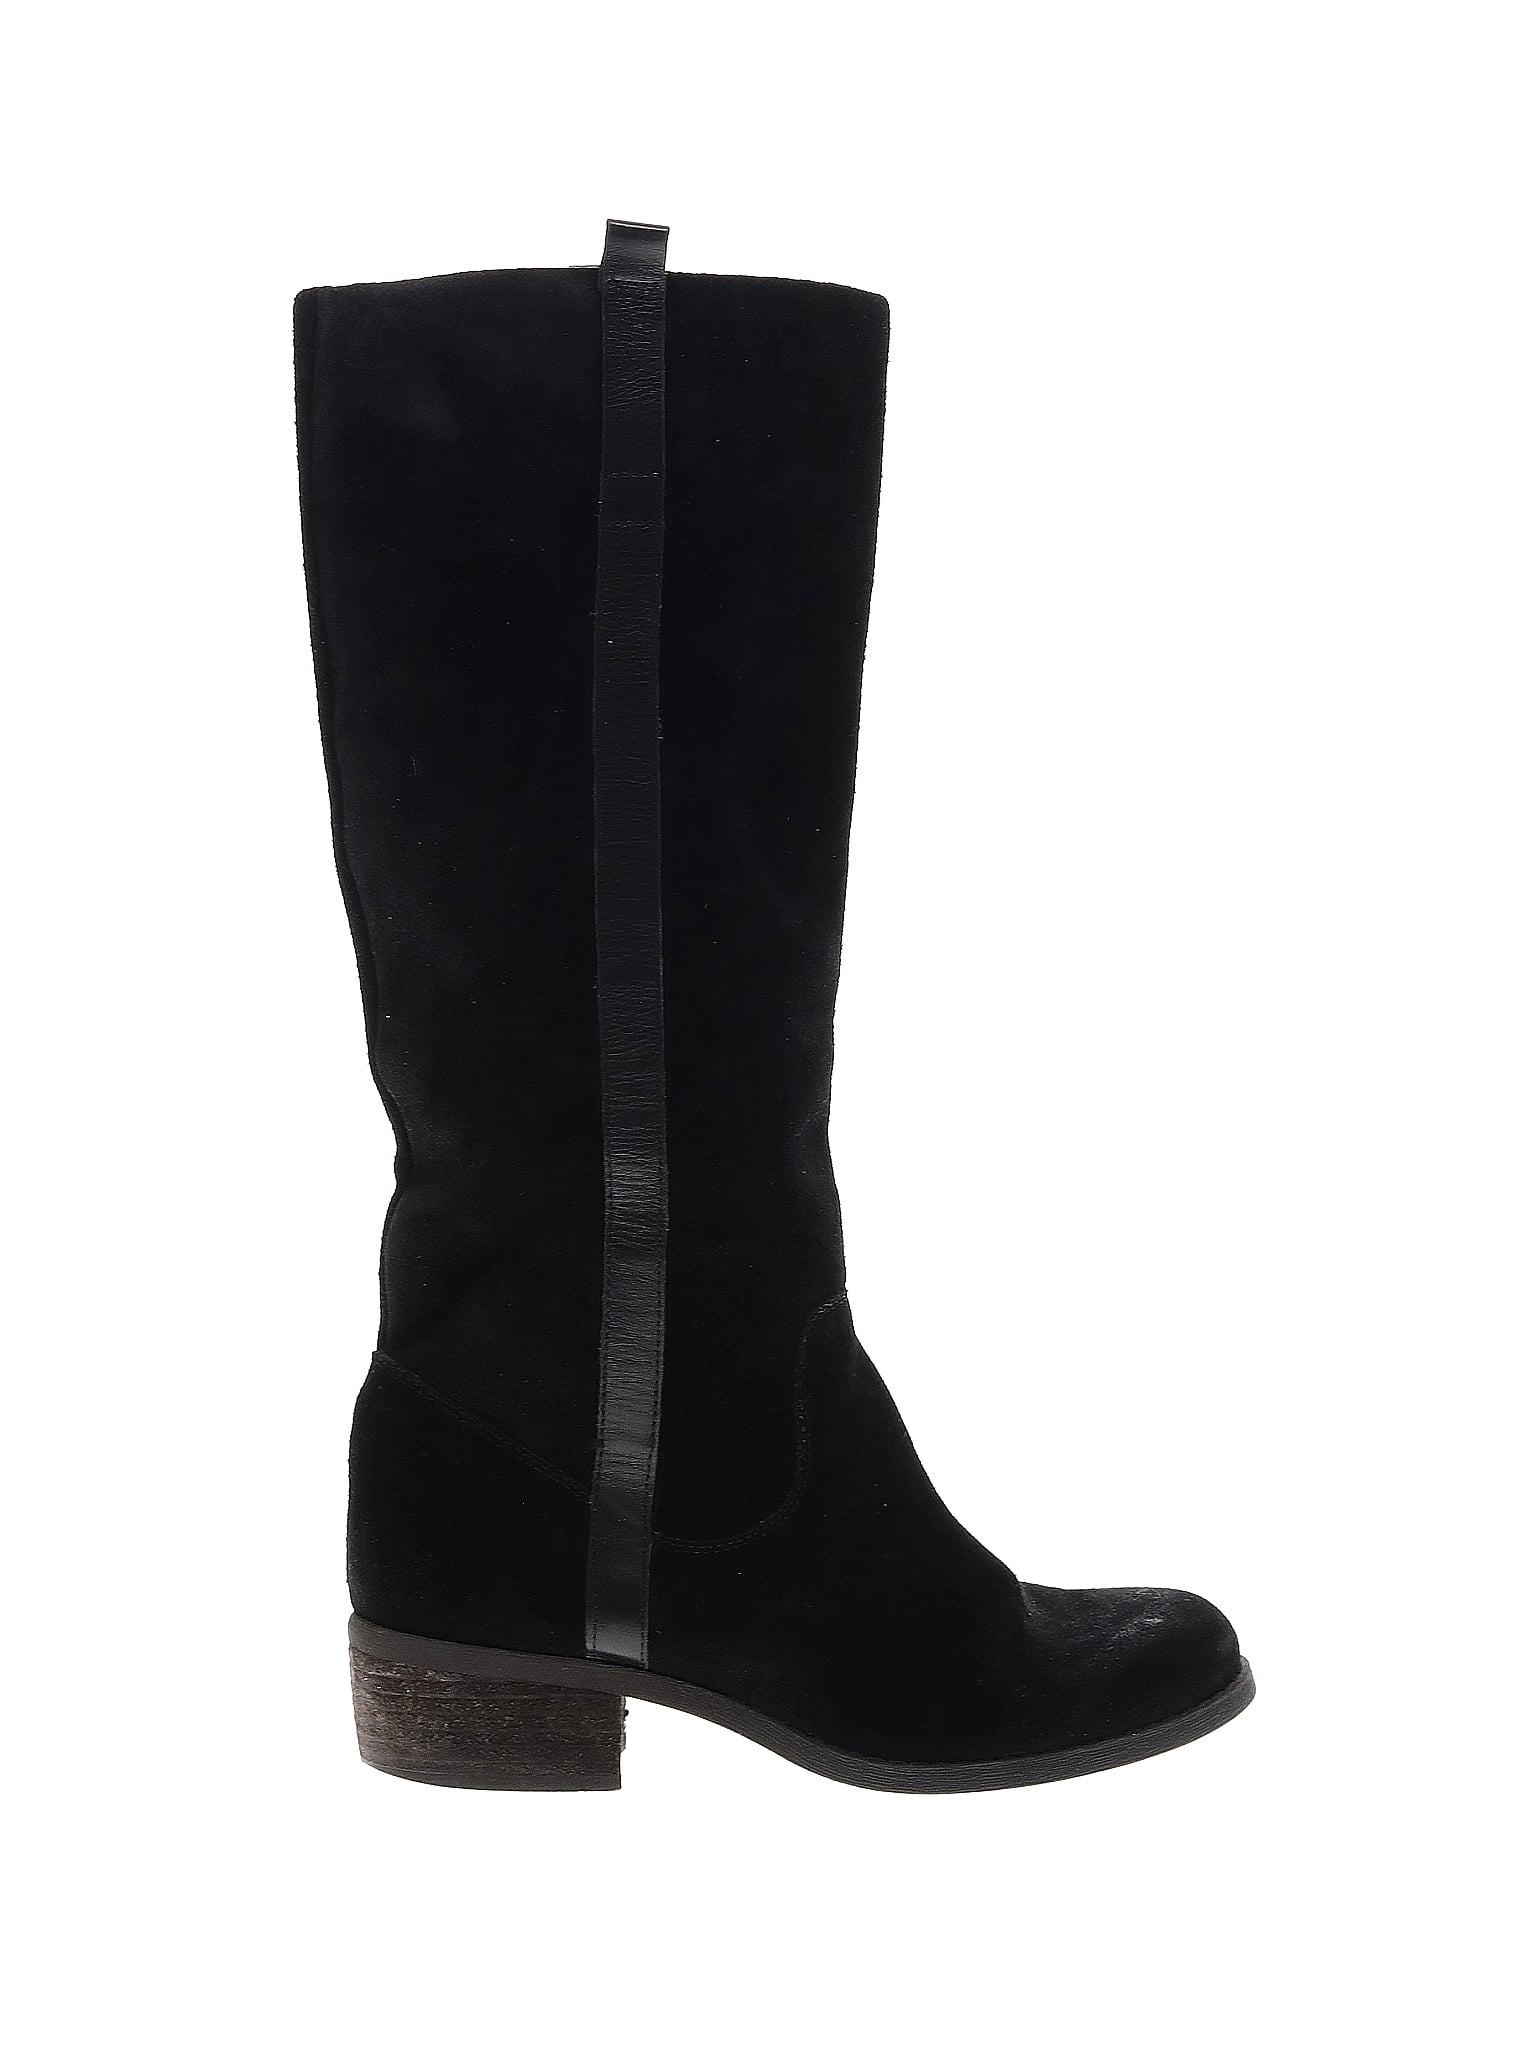 Gianni Bini Solid Black Boots Size 8 - 66% off | thredUP